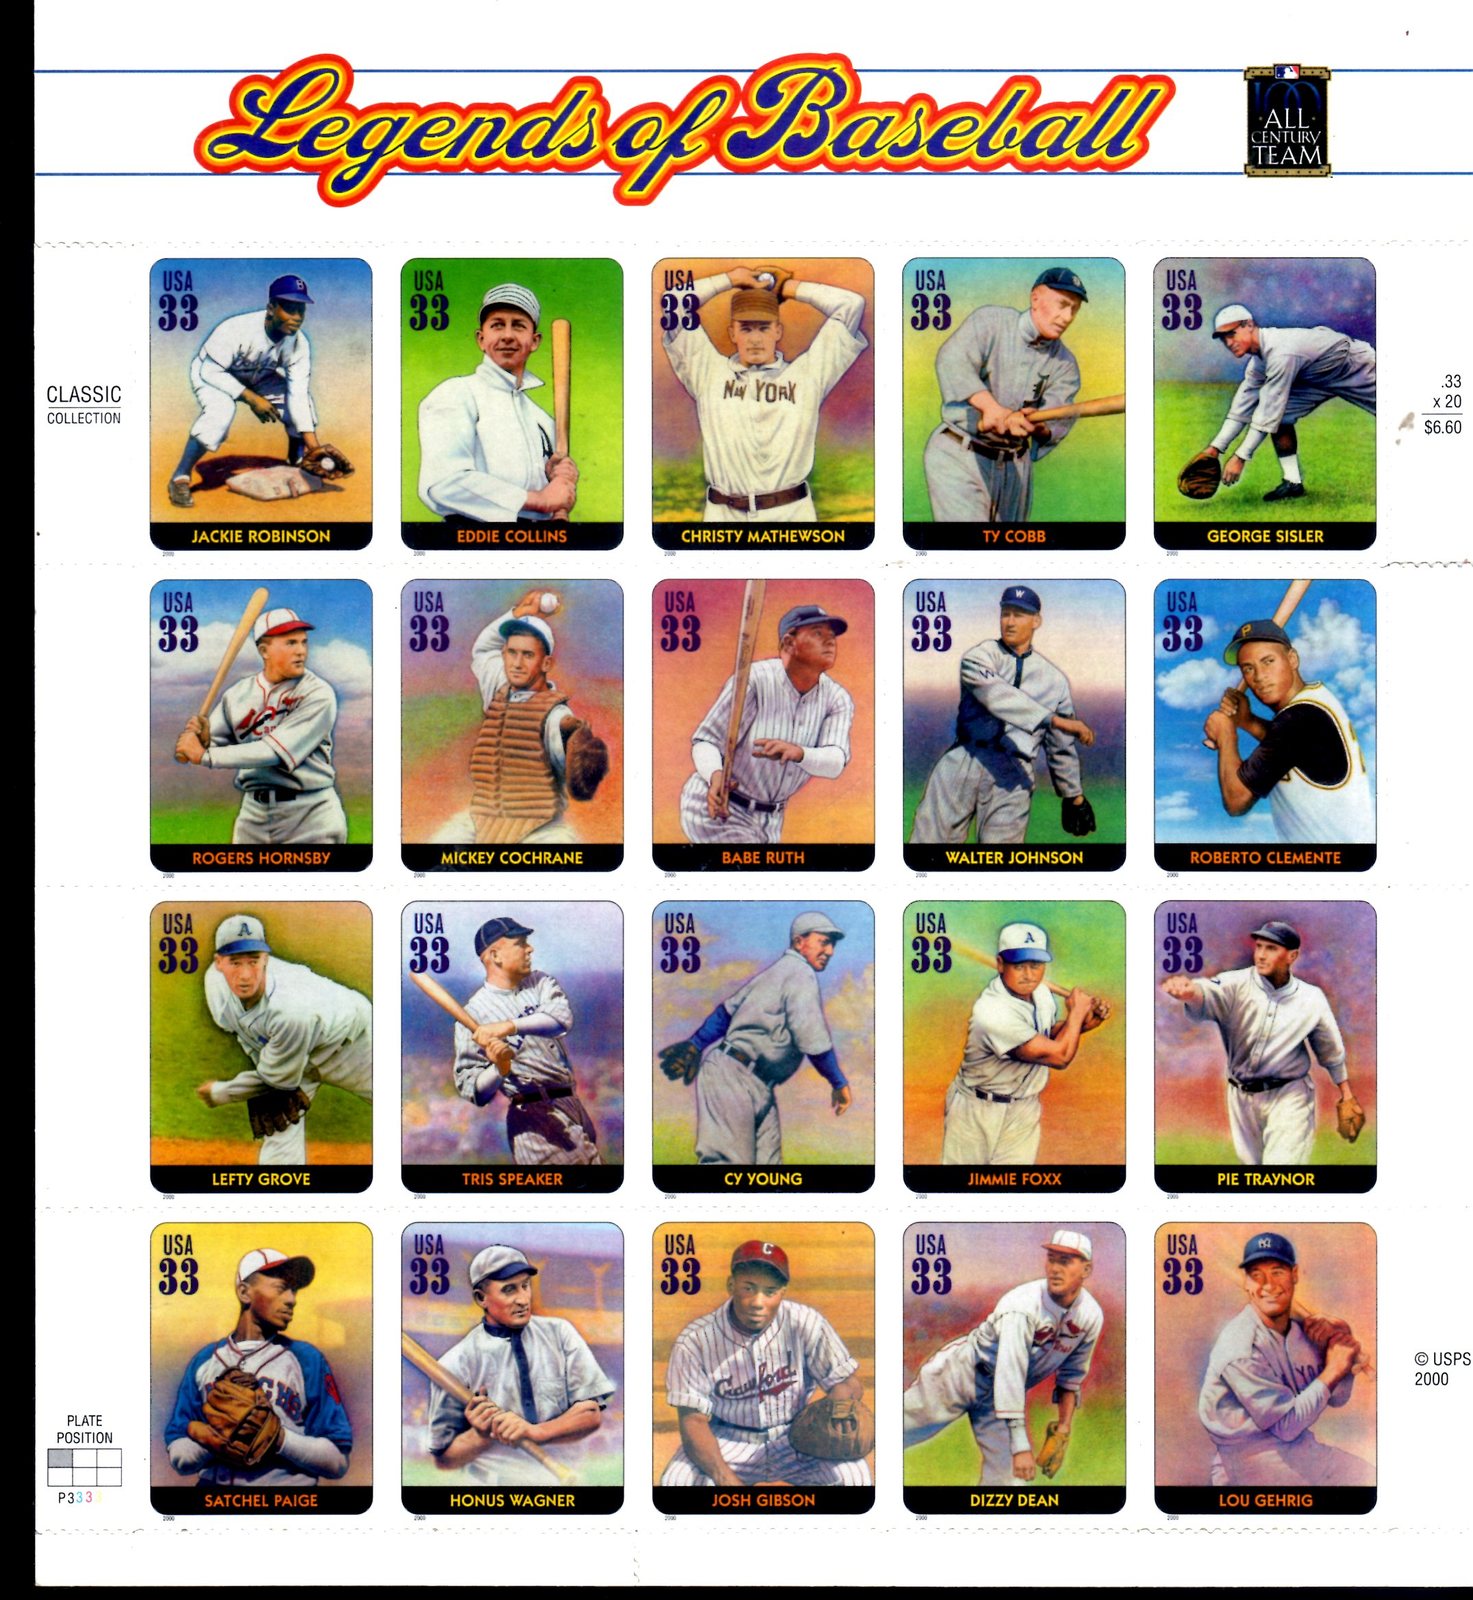 Primary image for U S Stamps - LEGENDS OF BASEBALL STAMP SHEET -- USA #3408, 20 : 33 CENT Stamps